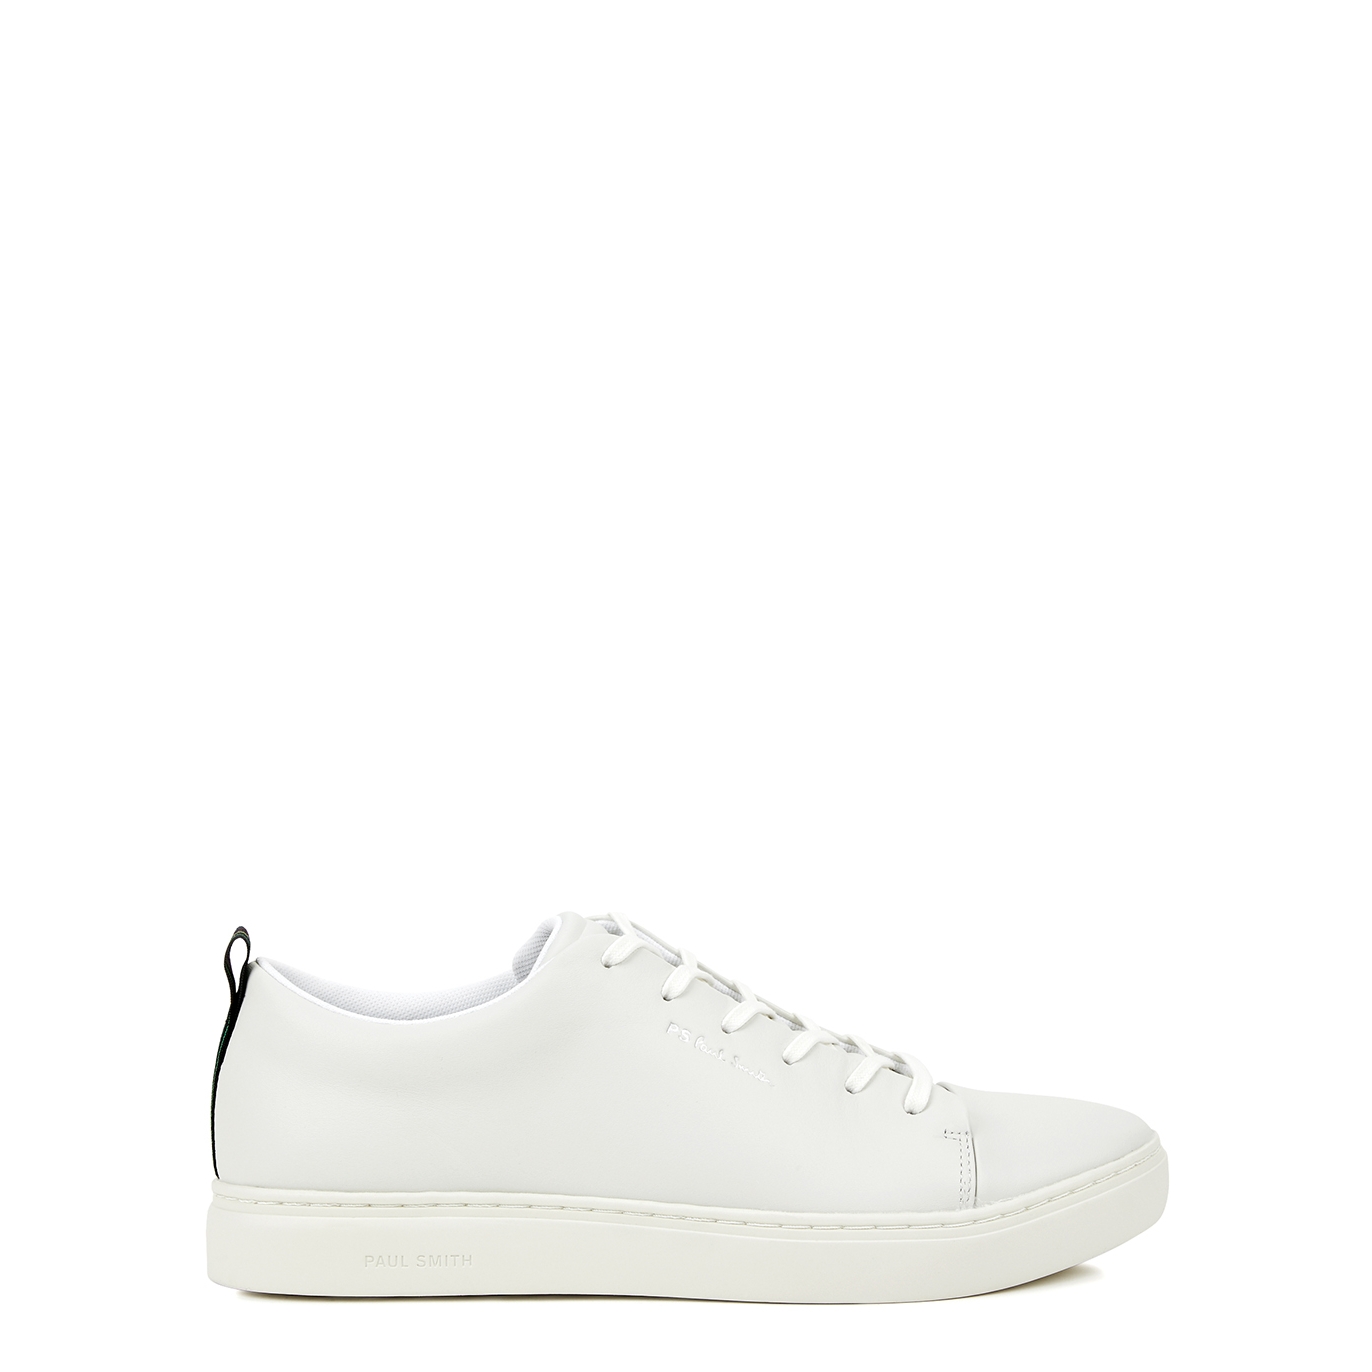 PAUL SMITH PAUL SMITH LEE LEATHER SNEAKERS